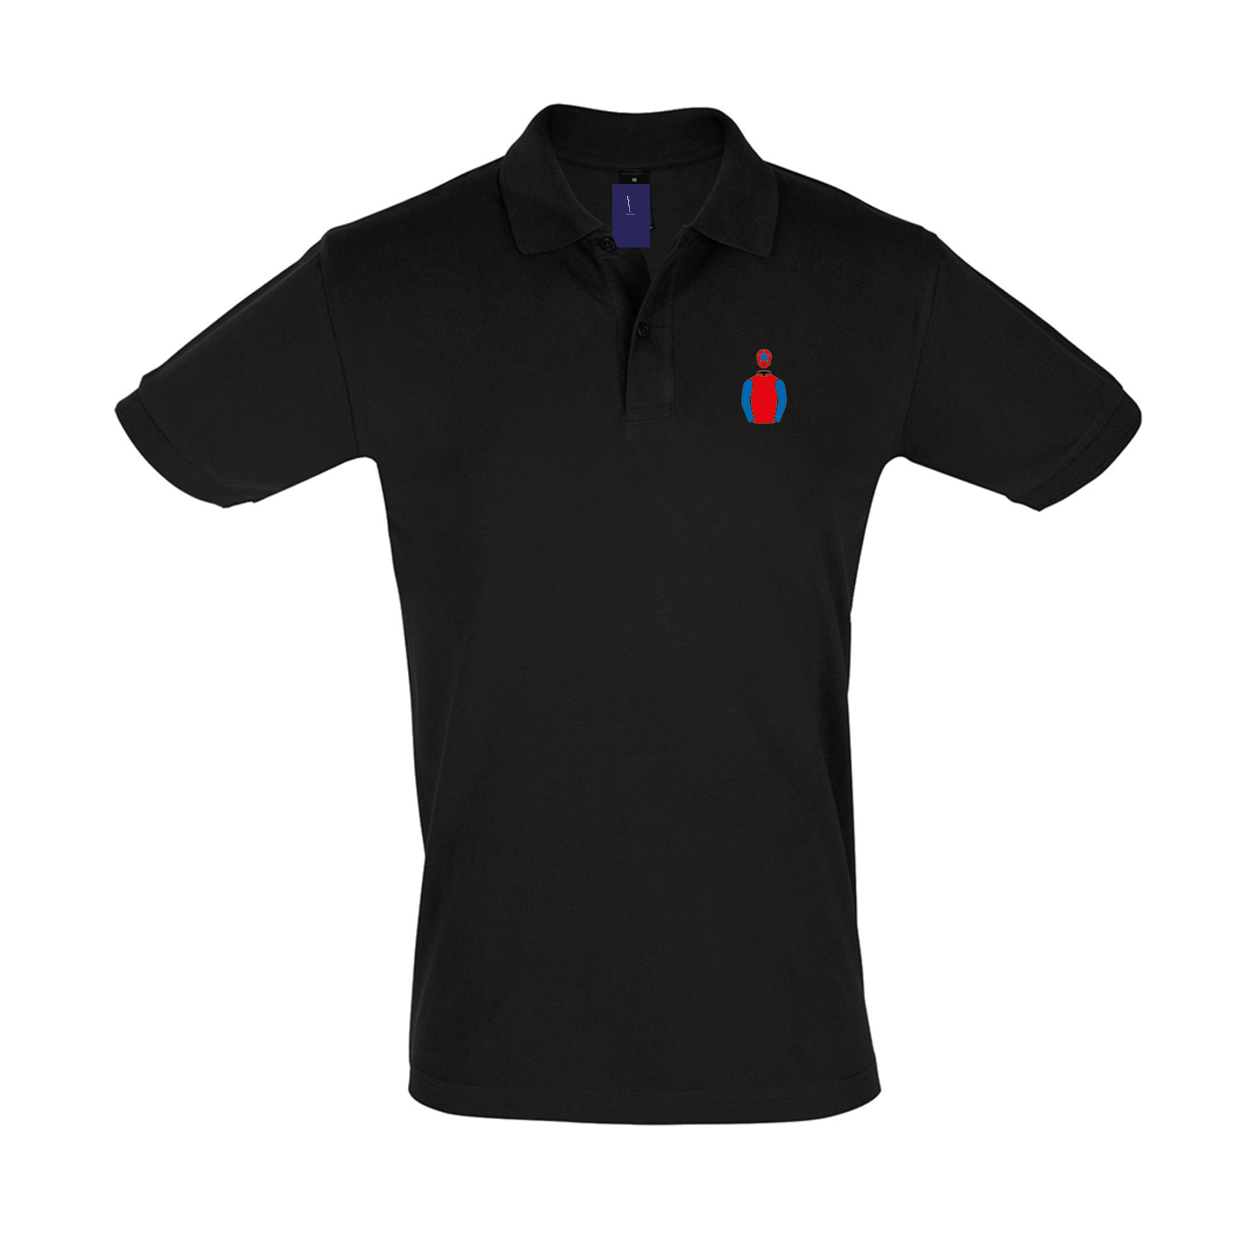 Ladies Hammer and Trowel Syndicate Embroidered Polo Shirt - Clothing - Hacked Up